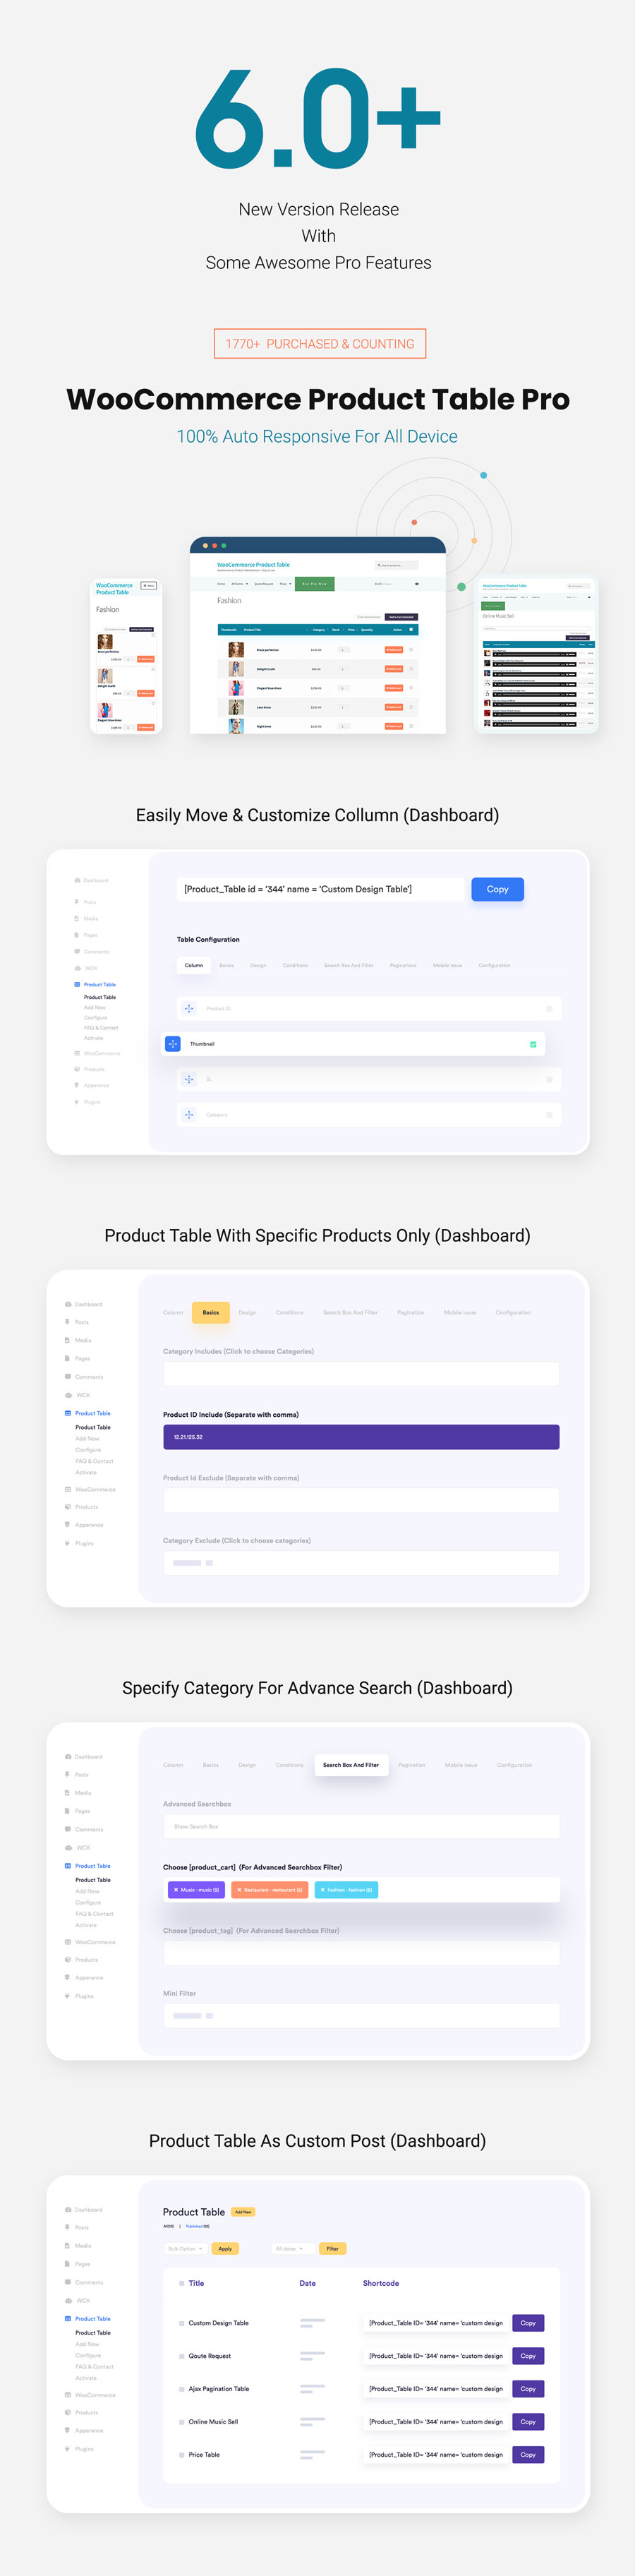 Woo Product Table Pro - WooCommerce Product Table view solution - 7